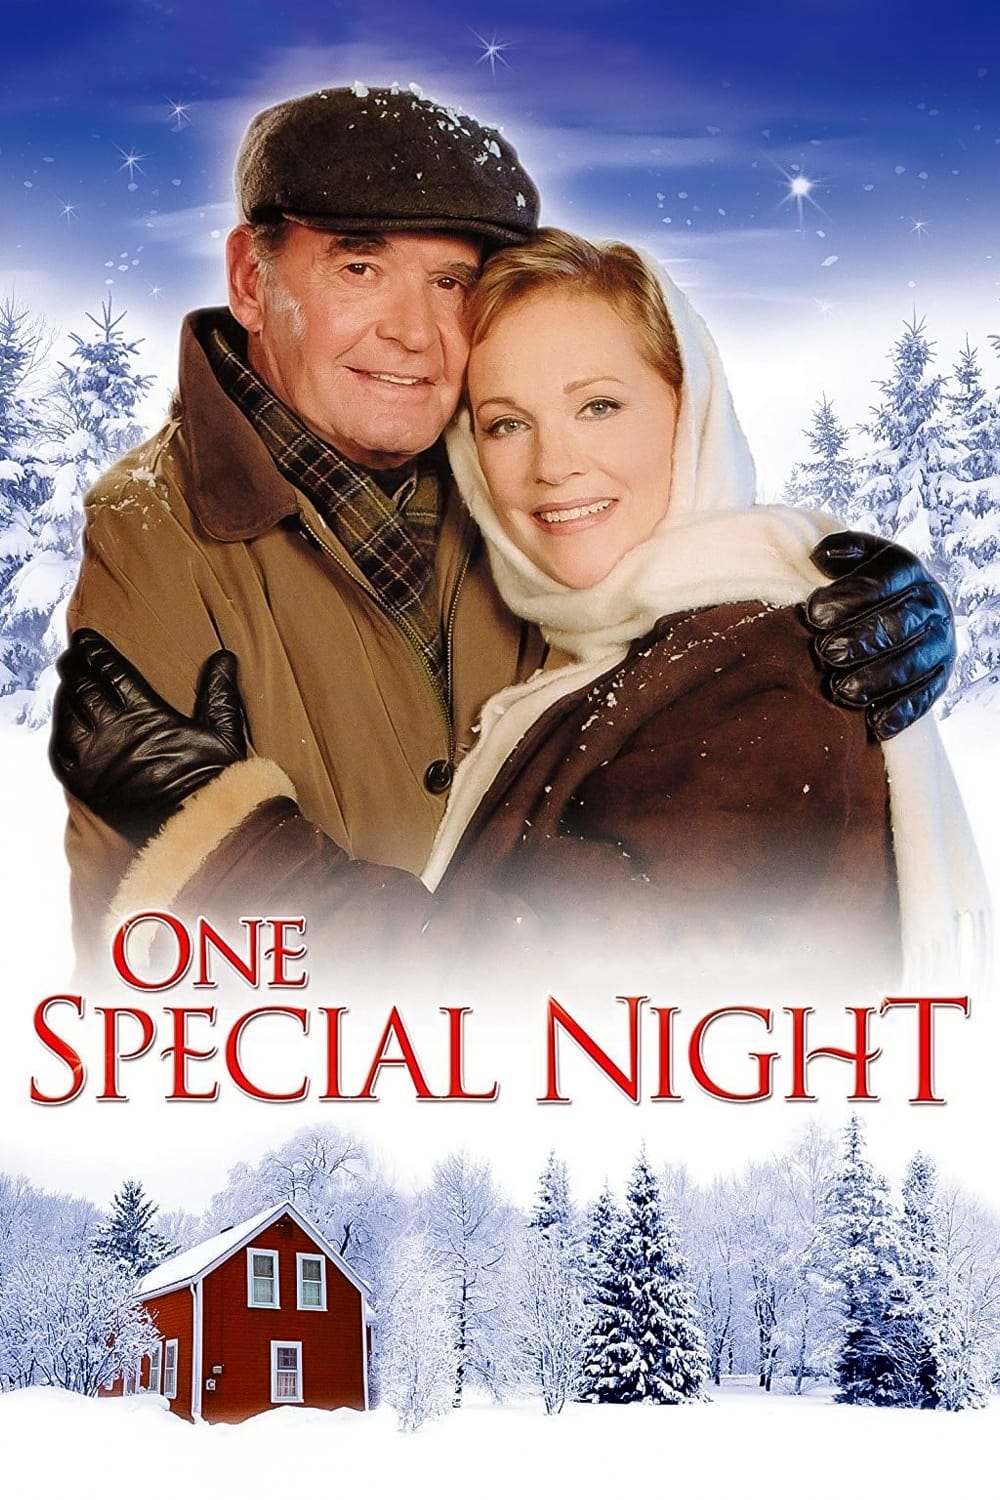 One Special Night (1999)